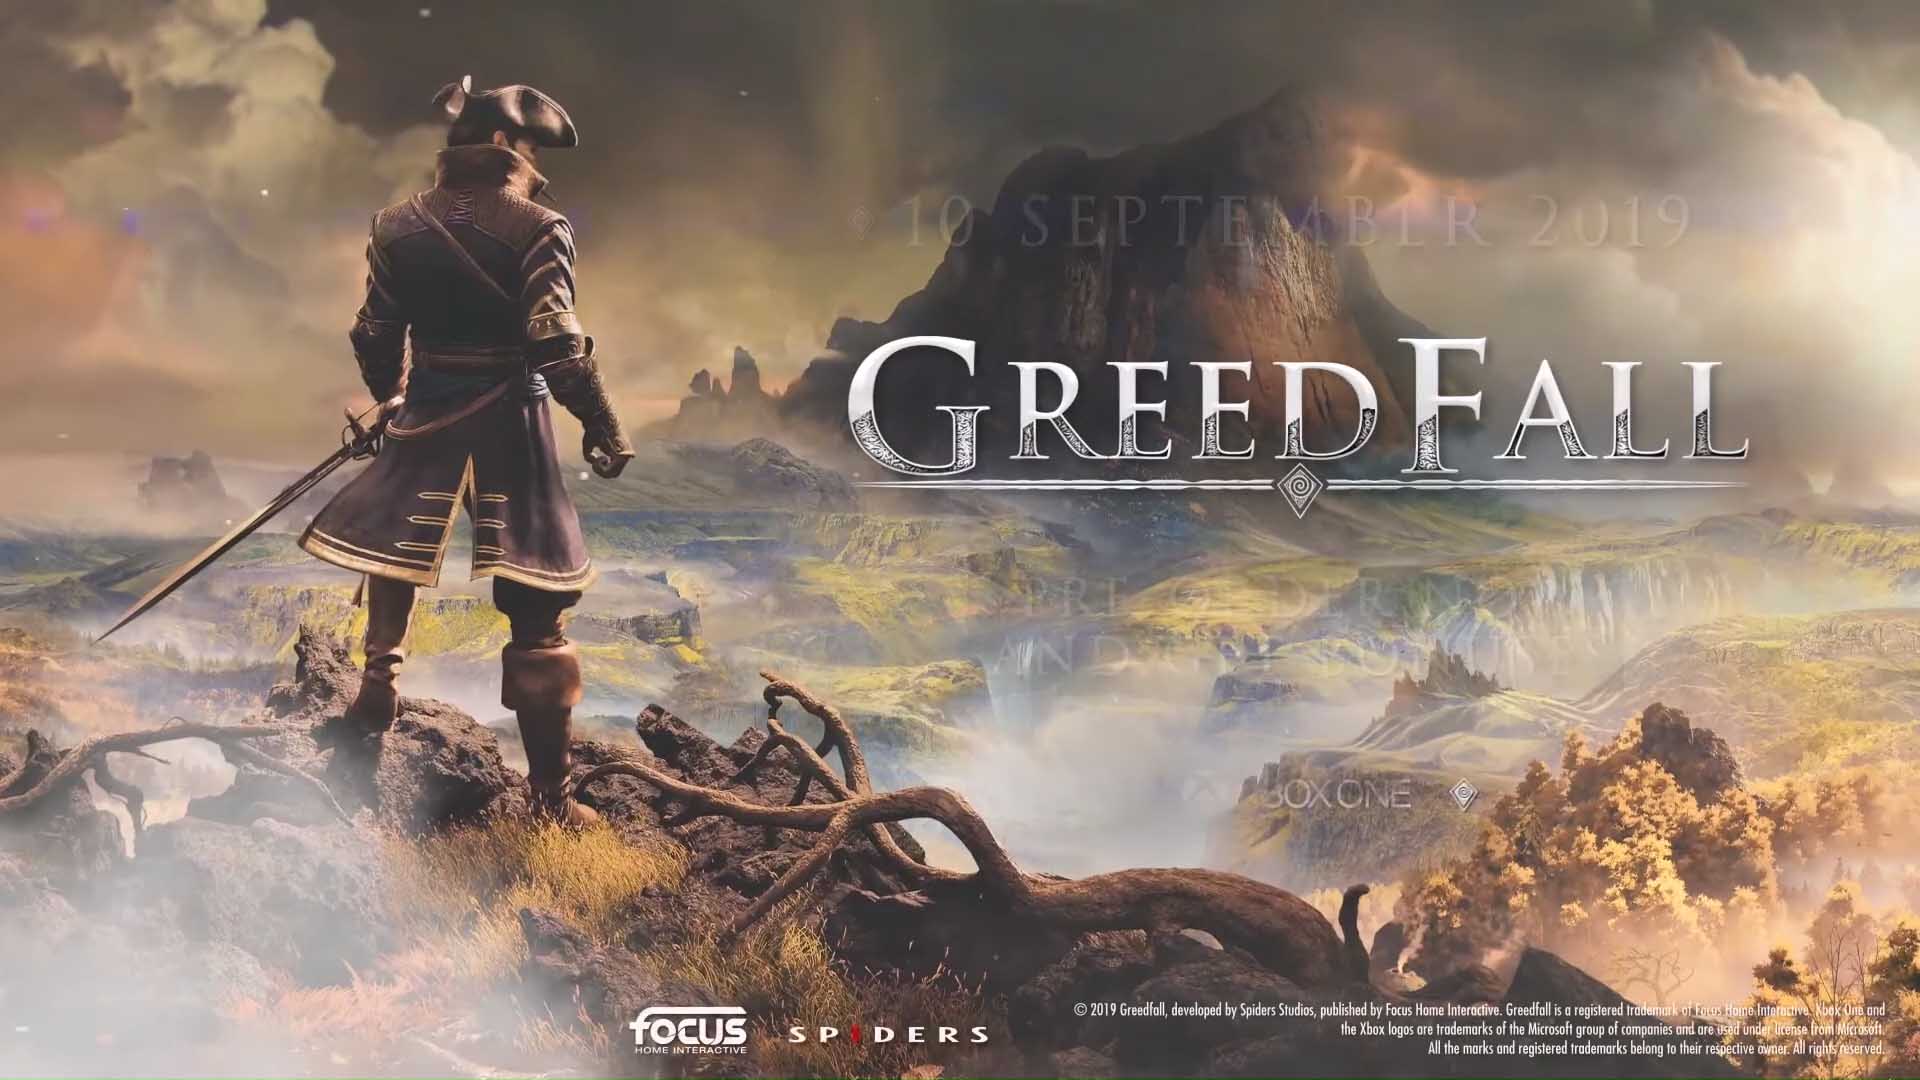 greedfall spiders focus home interactive